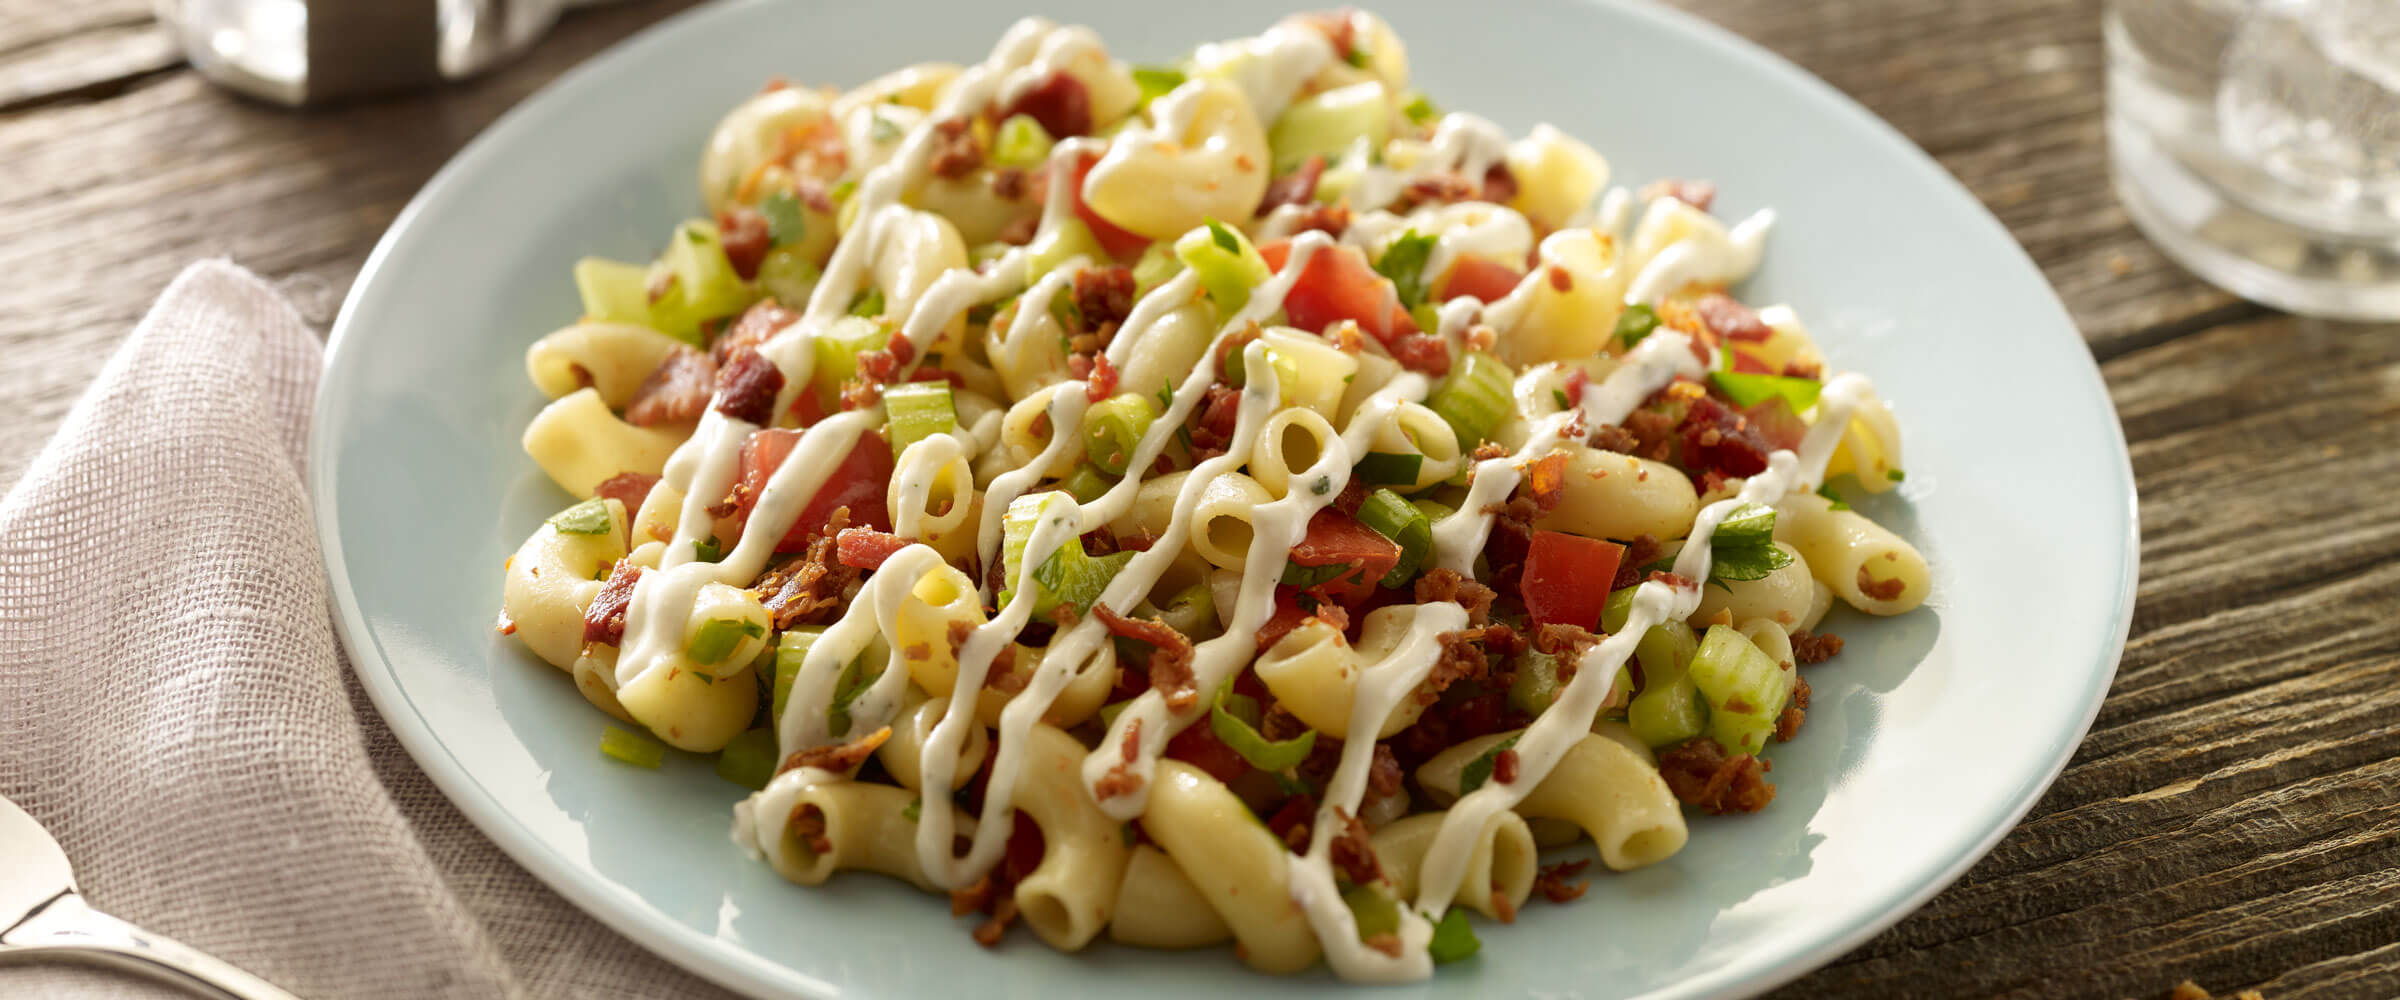 BLT Pasta Salad drizzled with mayo in white bowl